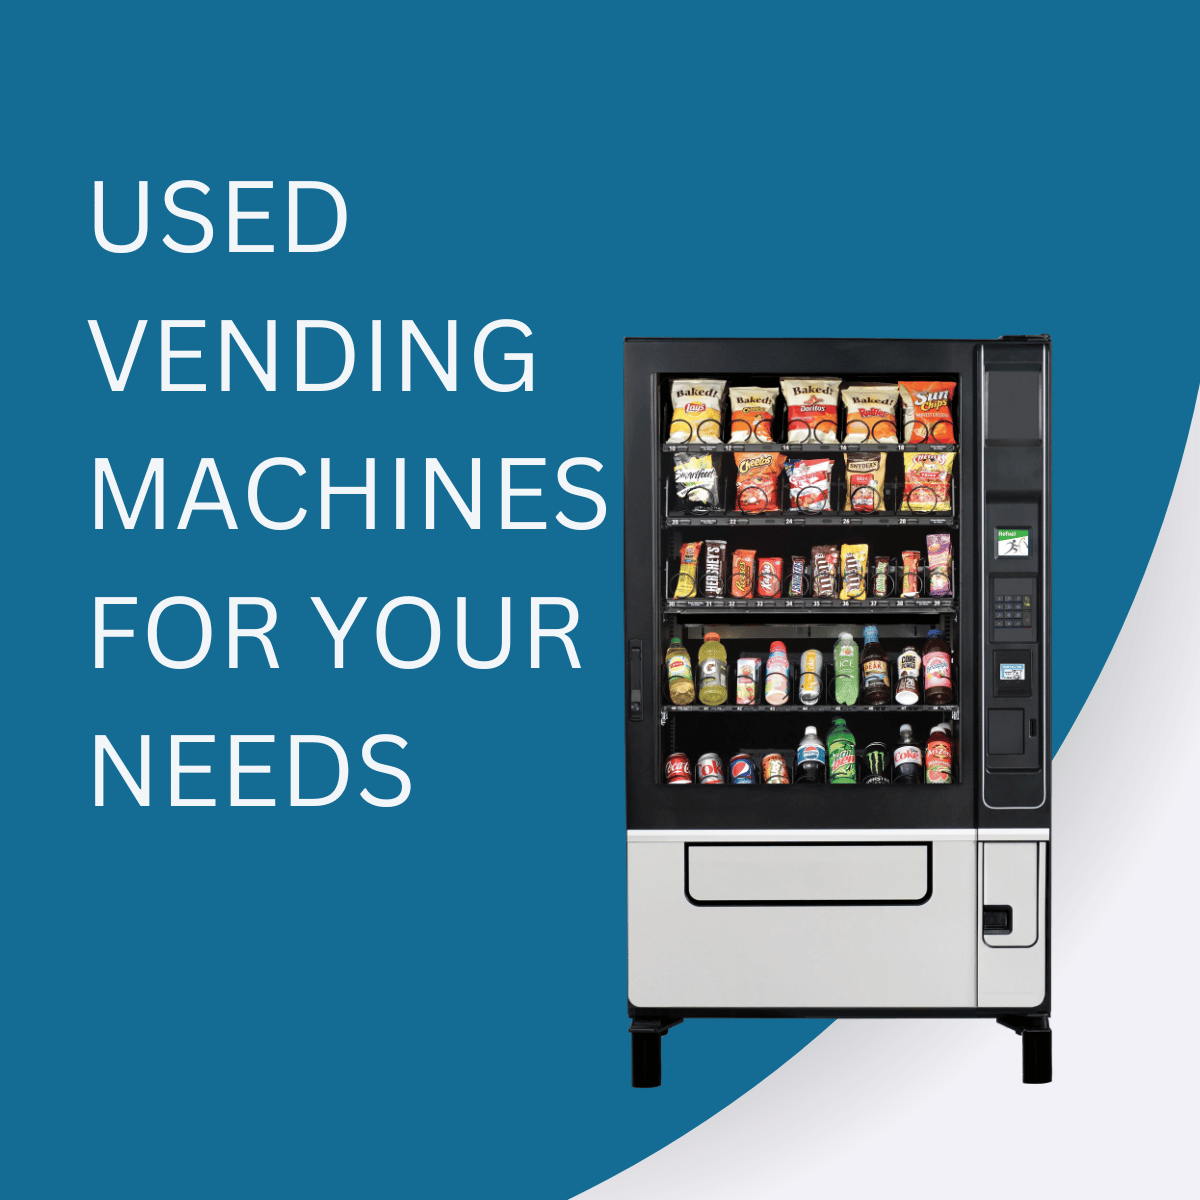 WE HAVE USED VENDING MACHINES TO MEET YOUR NEEDS